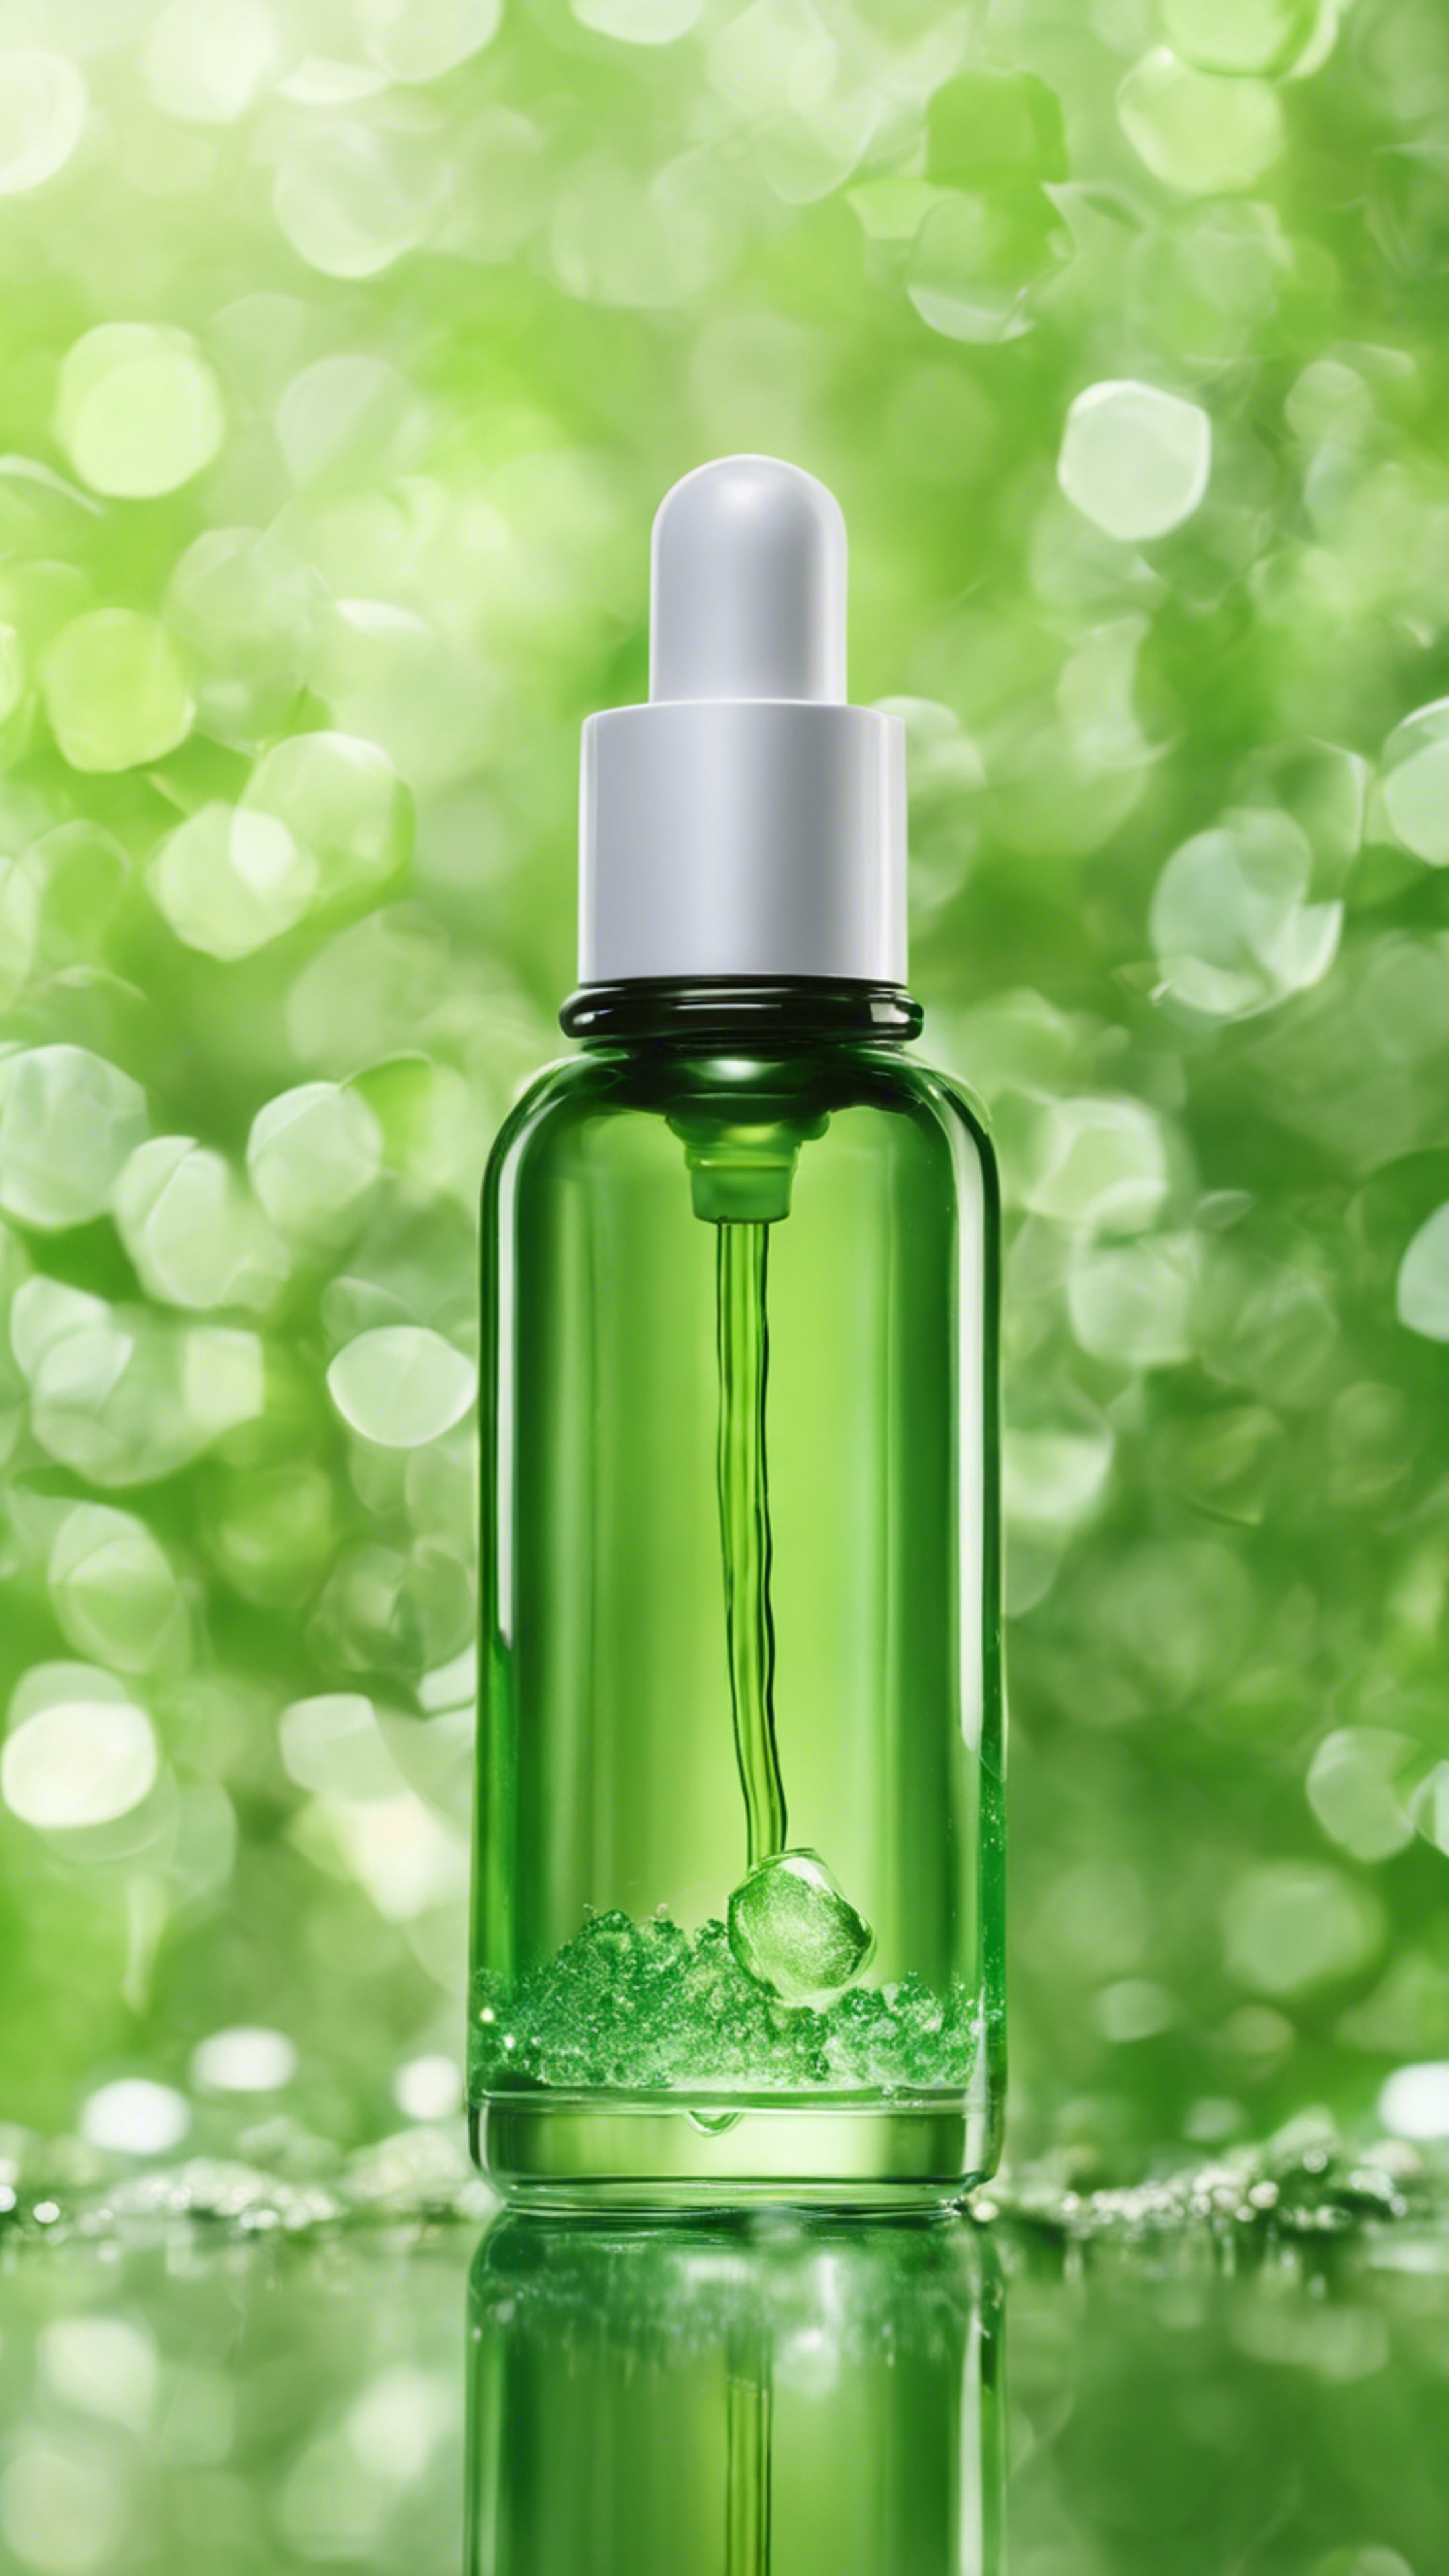 Green an eco-friendly cosmetics company's new hydrating face serum in a recyclable glass bottle. 牆紙[04a9344189e843ad9259]